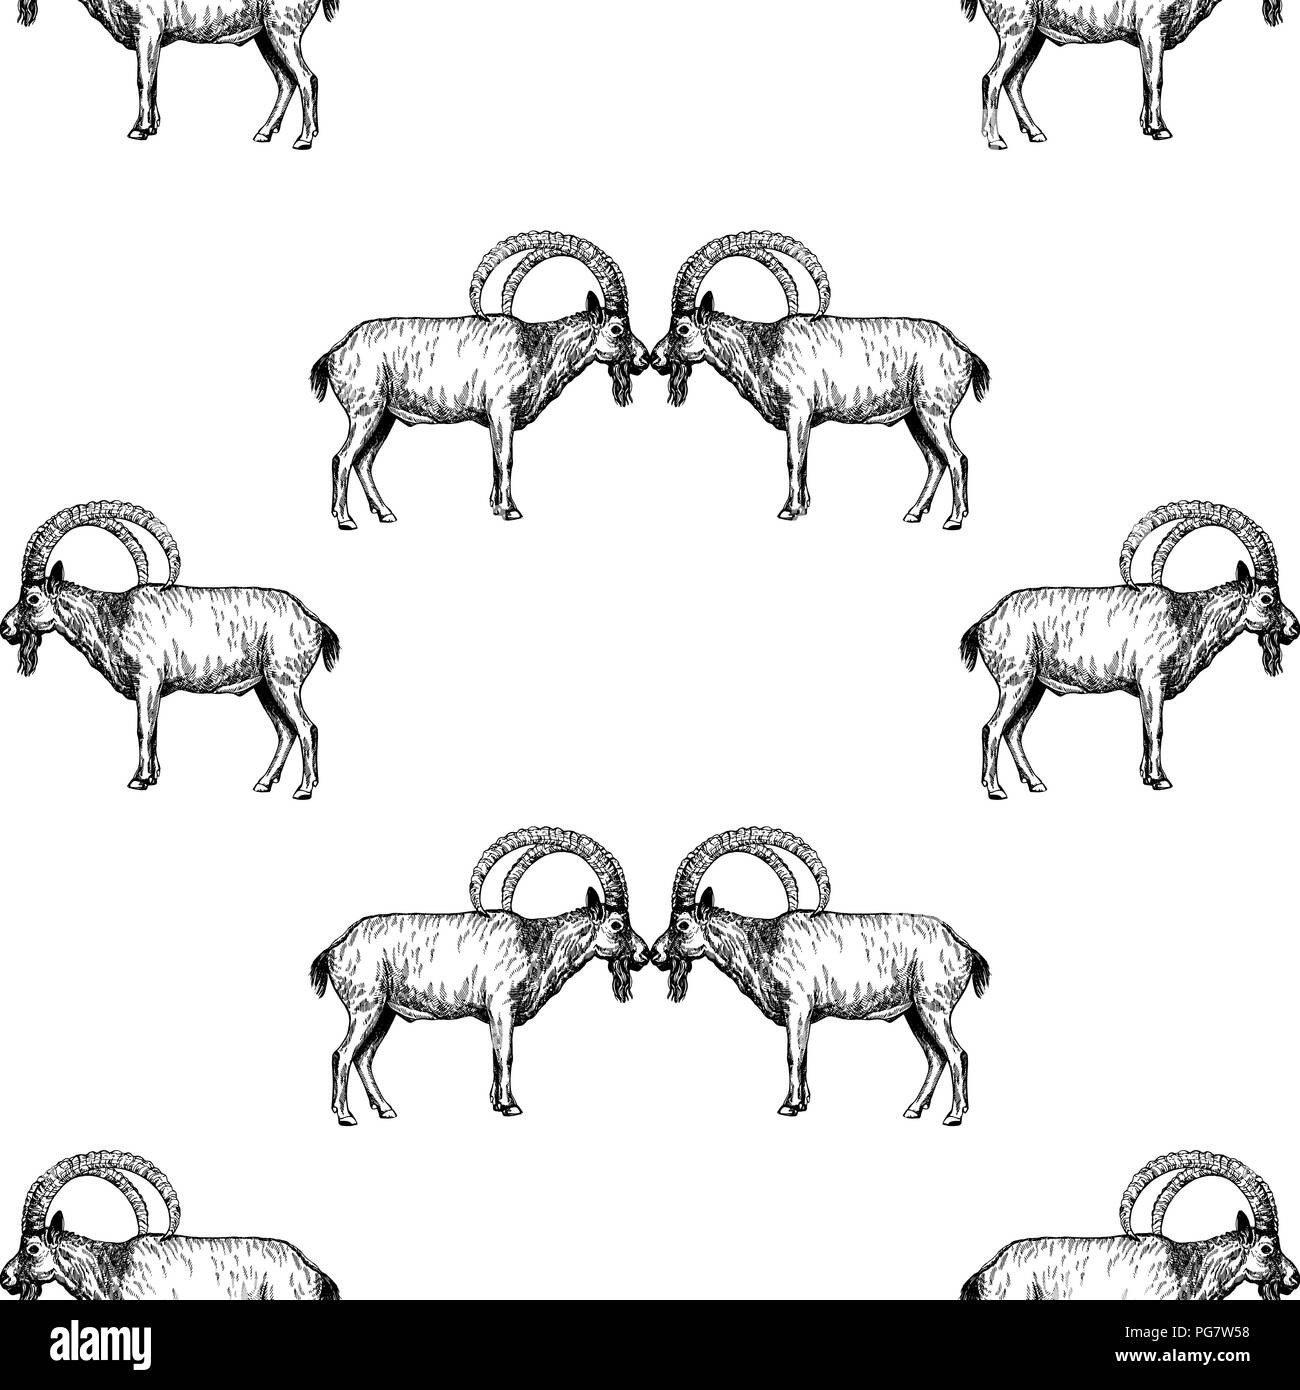 Seamless pattern of hand drawn sketch style mountain goats isolated on ...